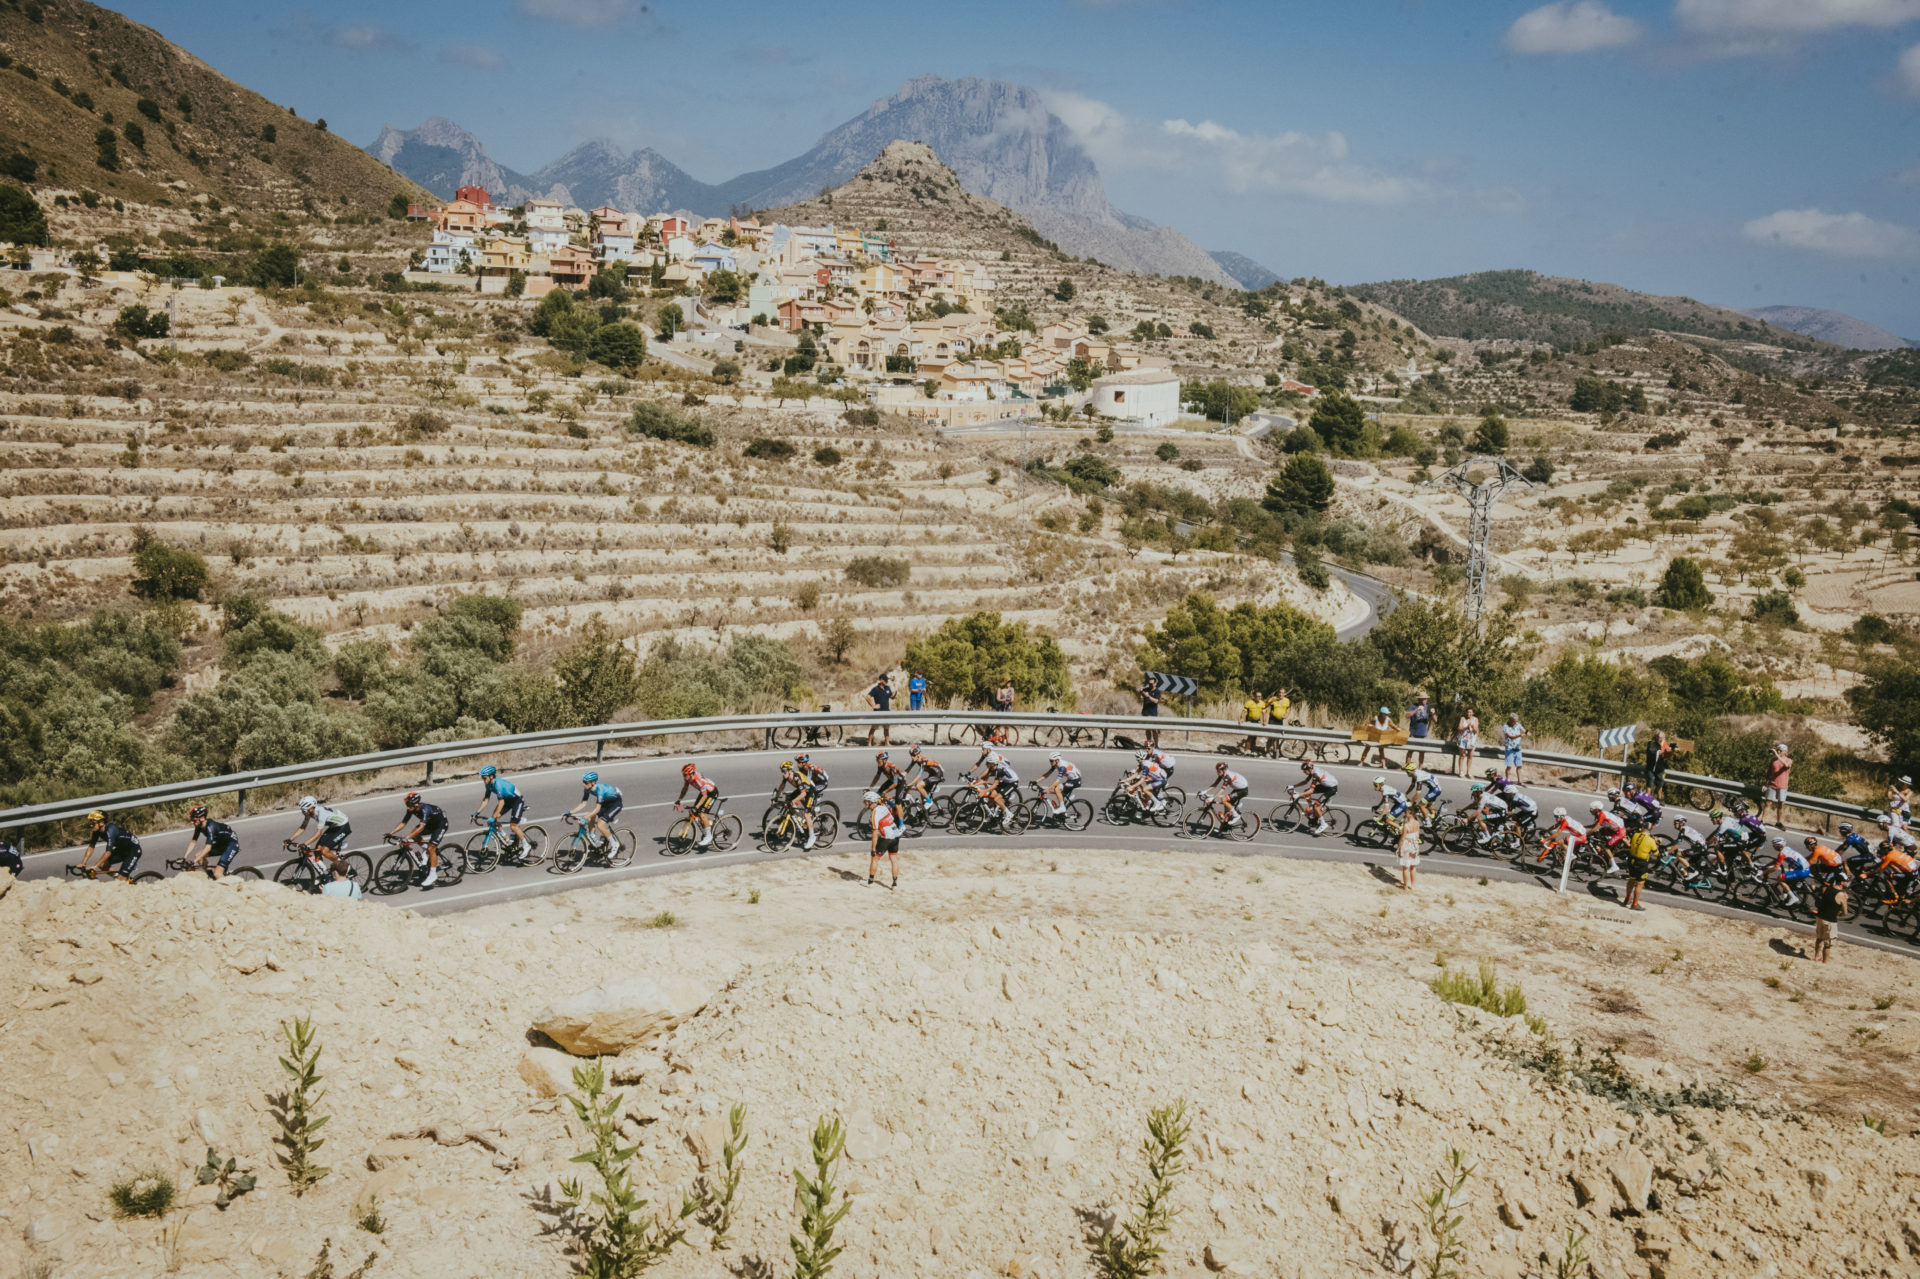 Riders going up a hill in the 2021 Vuelta a Espana